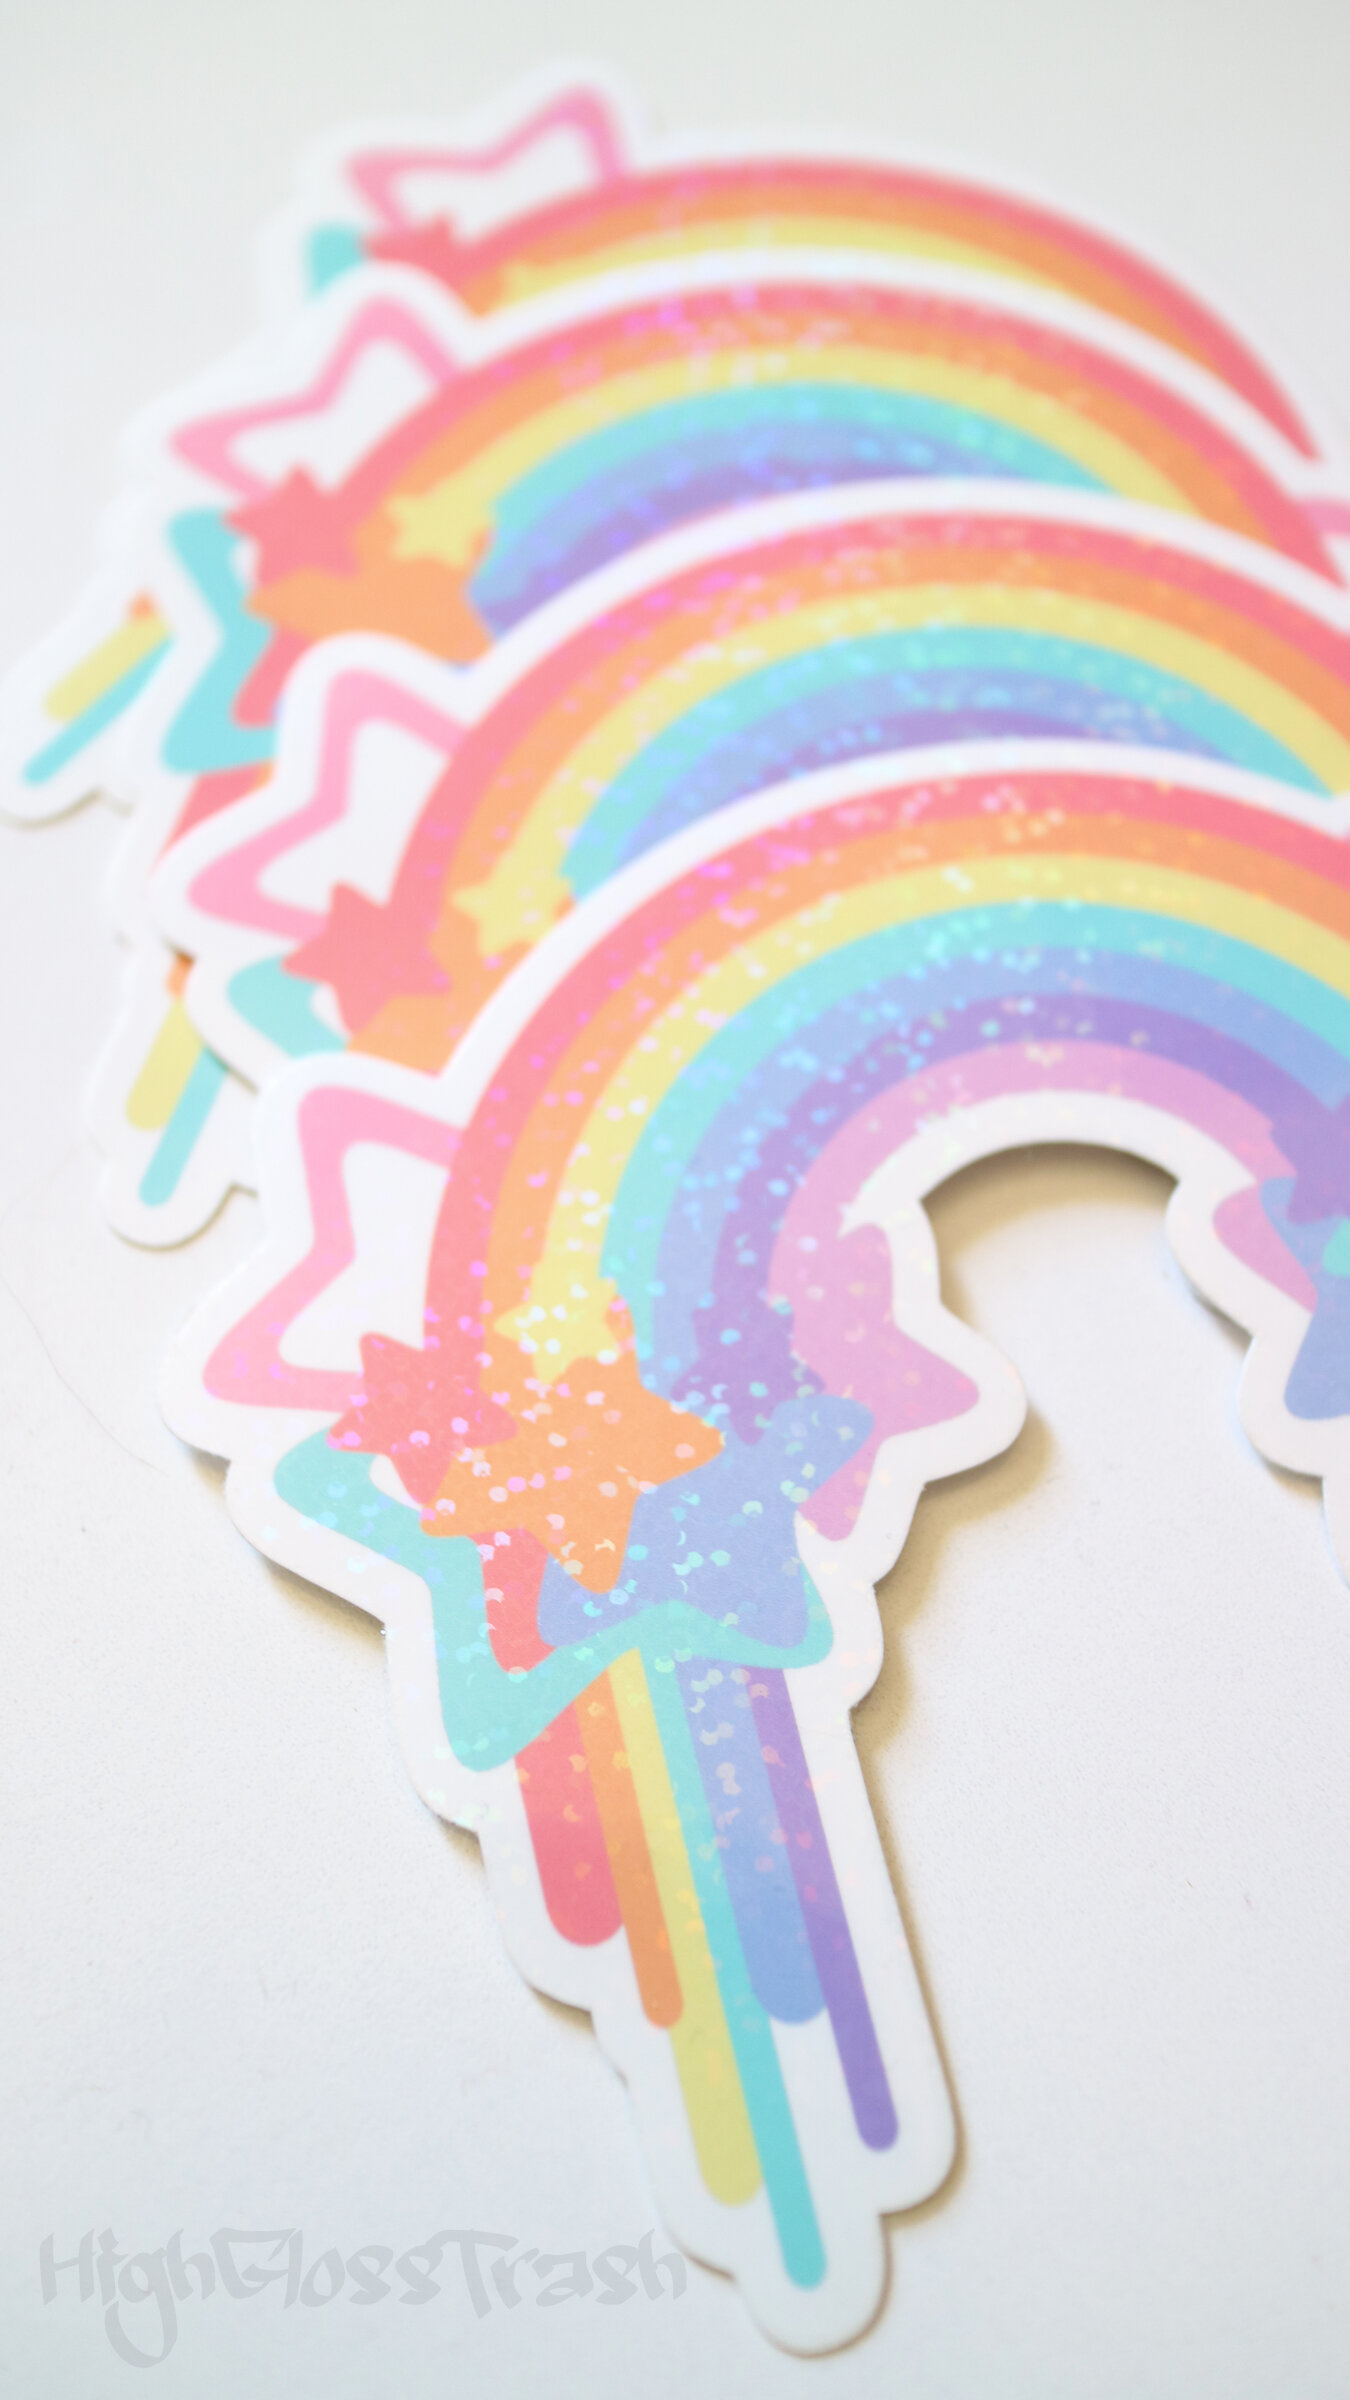 Large Holographic Pastel Rainbow Stickers — High Gloss Trash